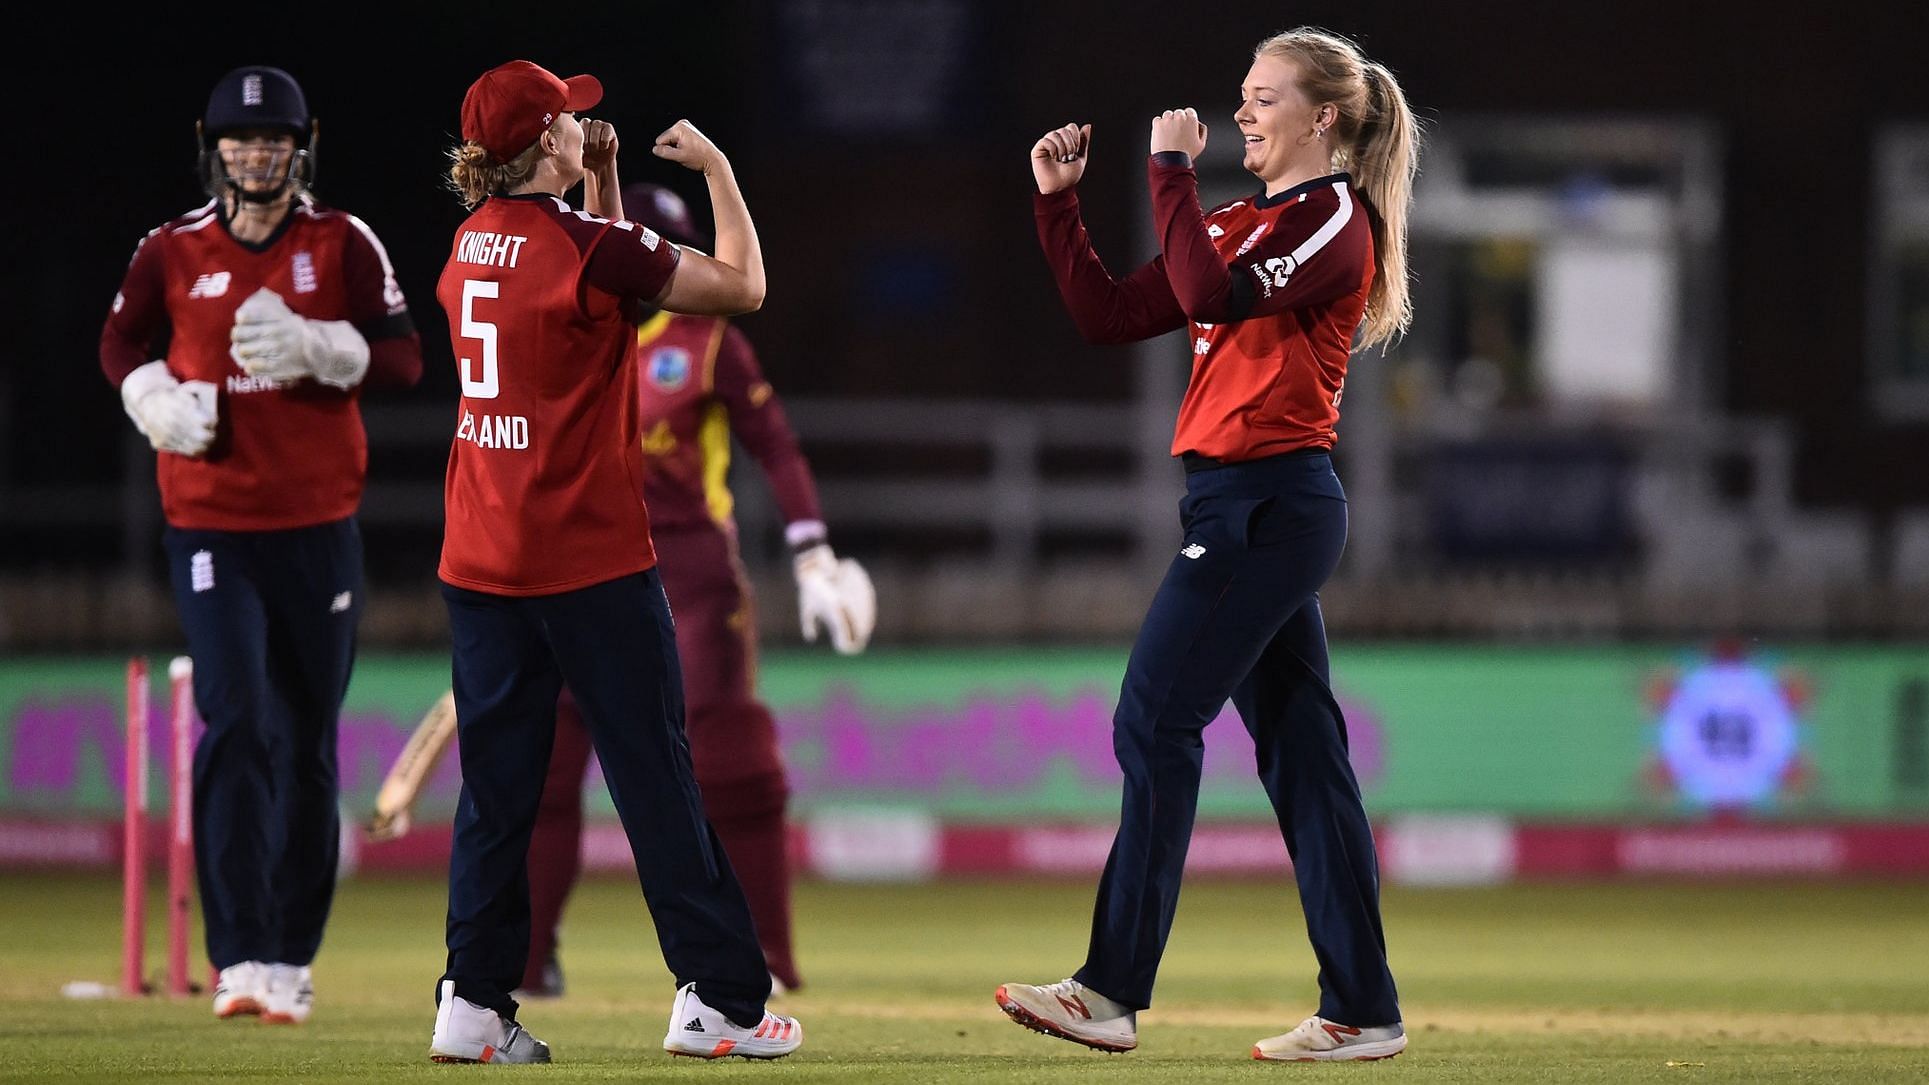 England’s leg-spinner Sarah Glenn was the Player of the Match, after she starred with both bat and ball to give England its second win in as many games.